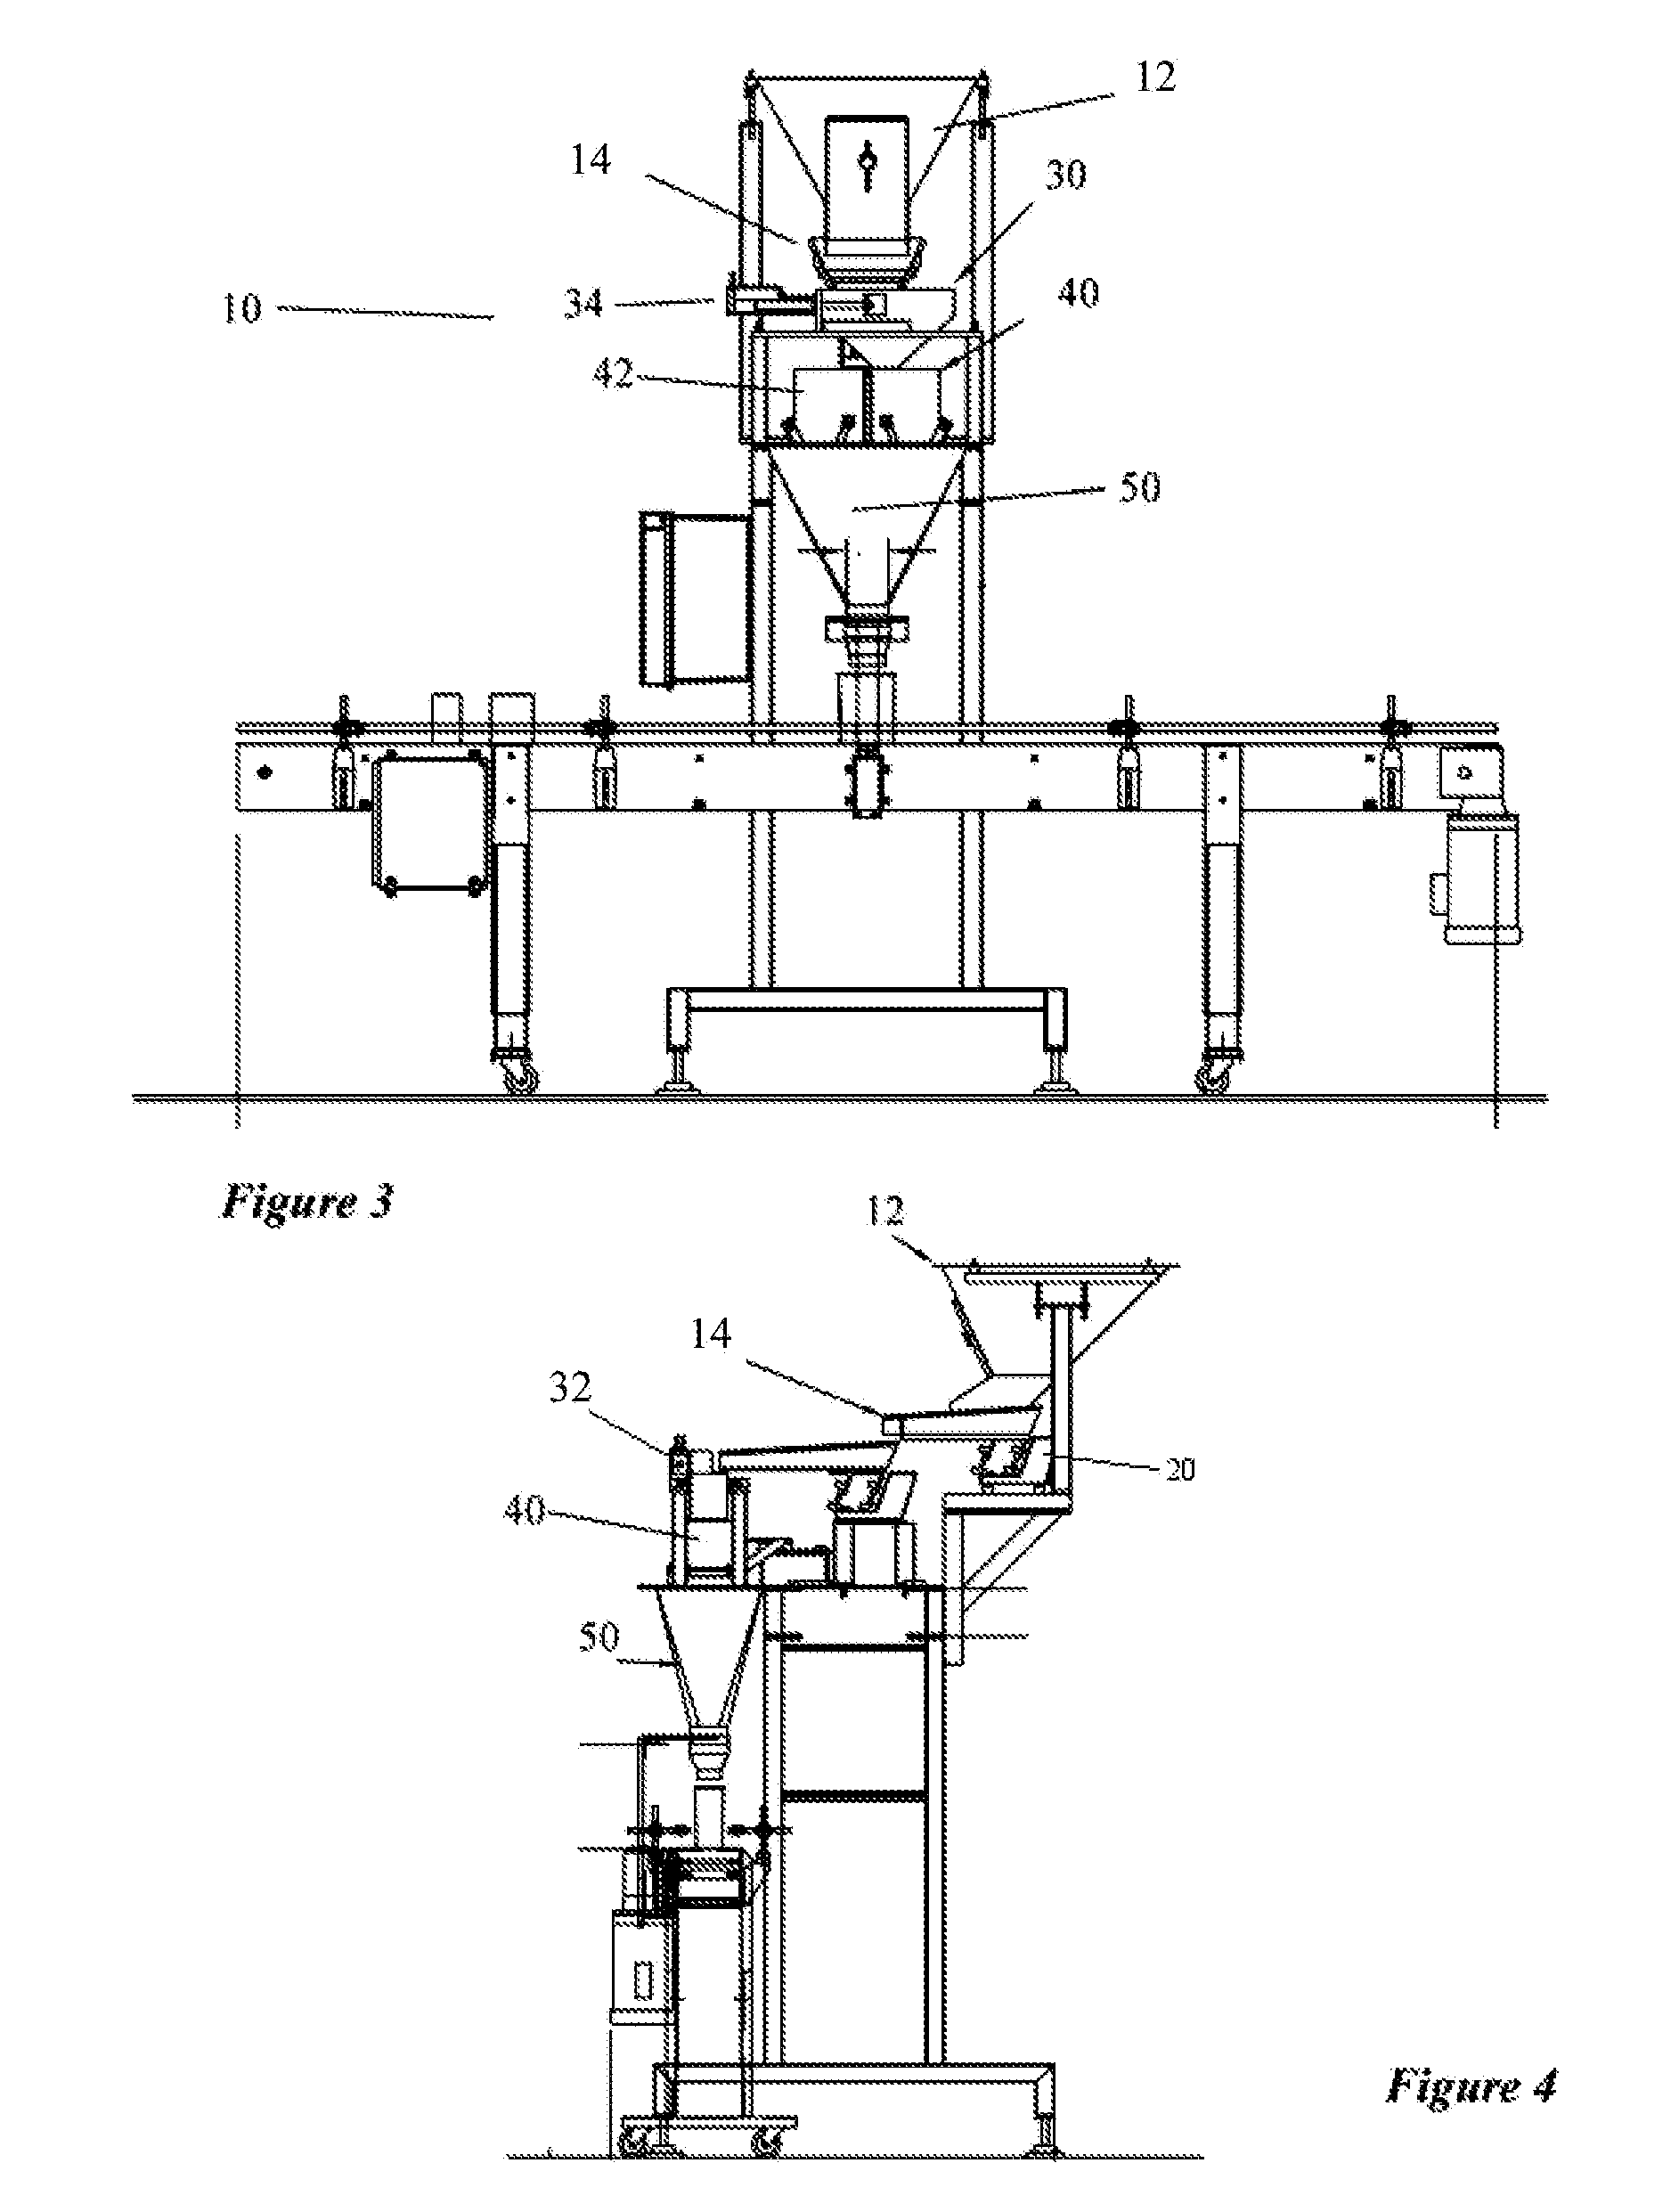 Automatic Weight Scale Machine with Unalterd Primary Product Feed Rates and Diverter System